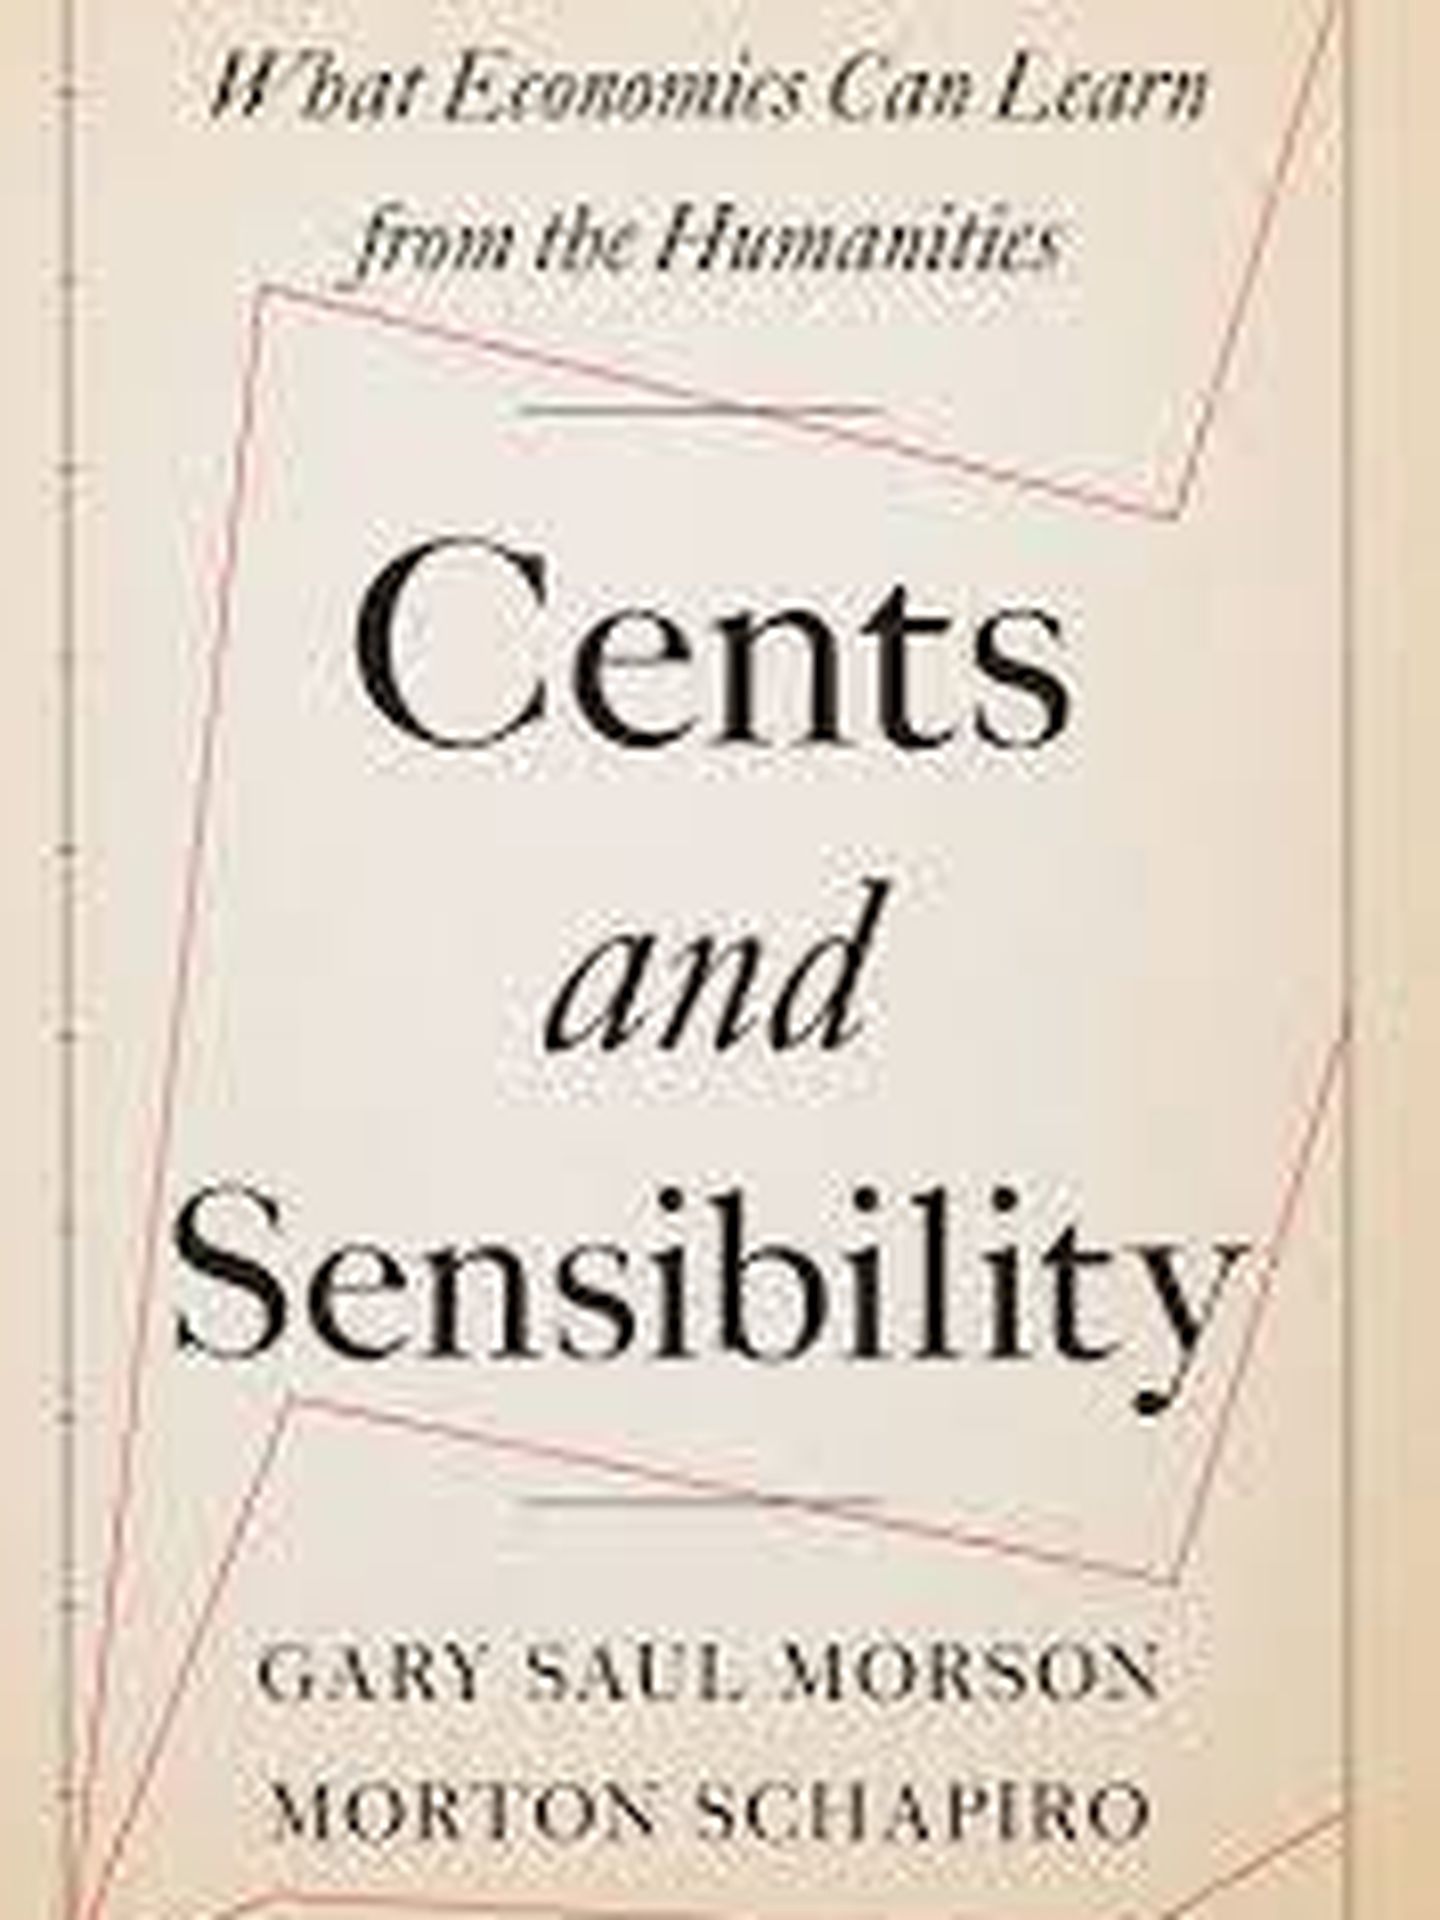 'Cents and sensibility'